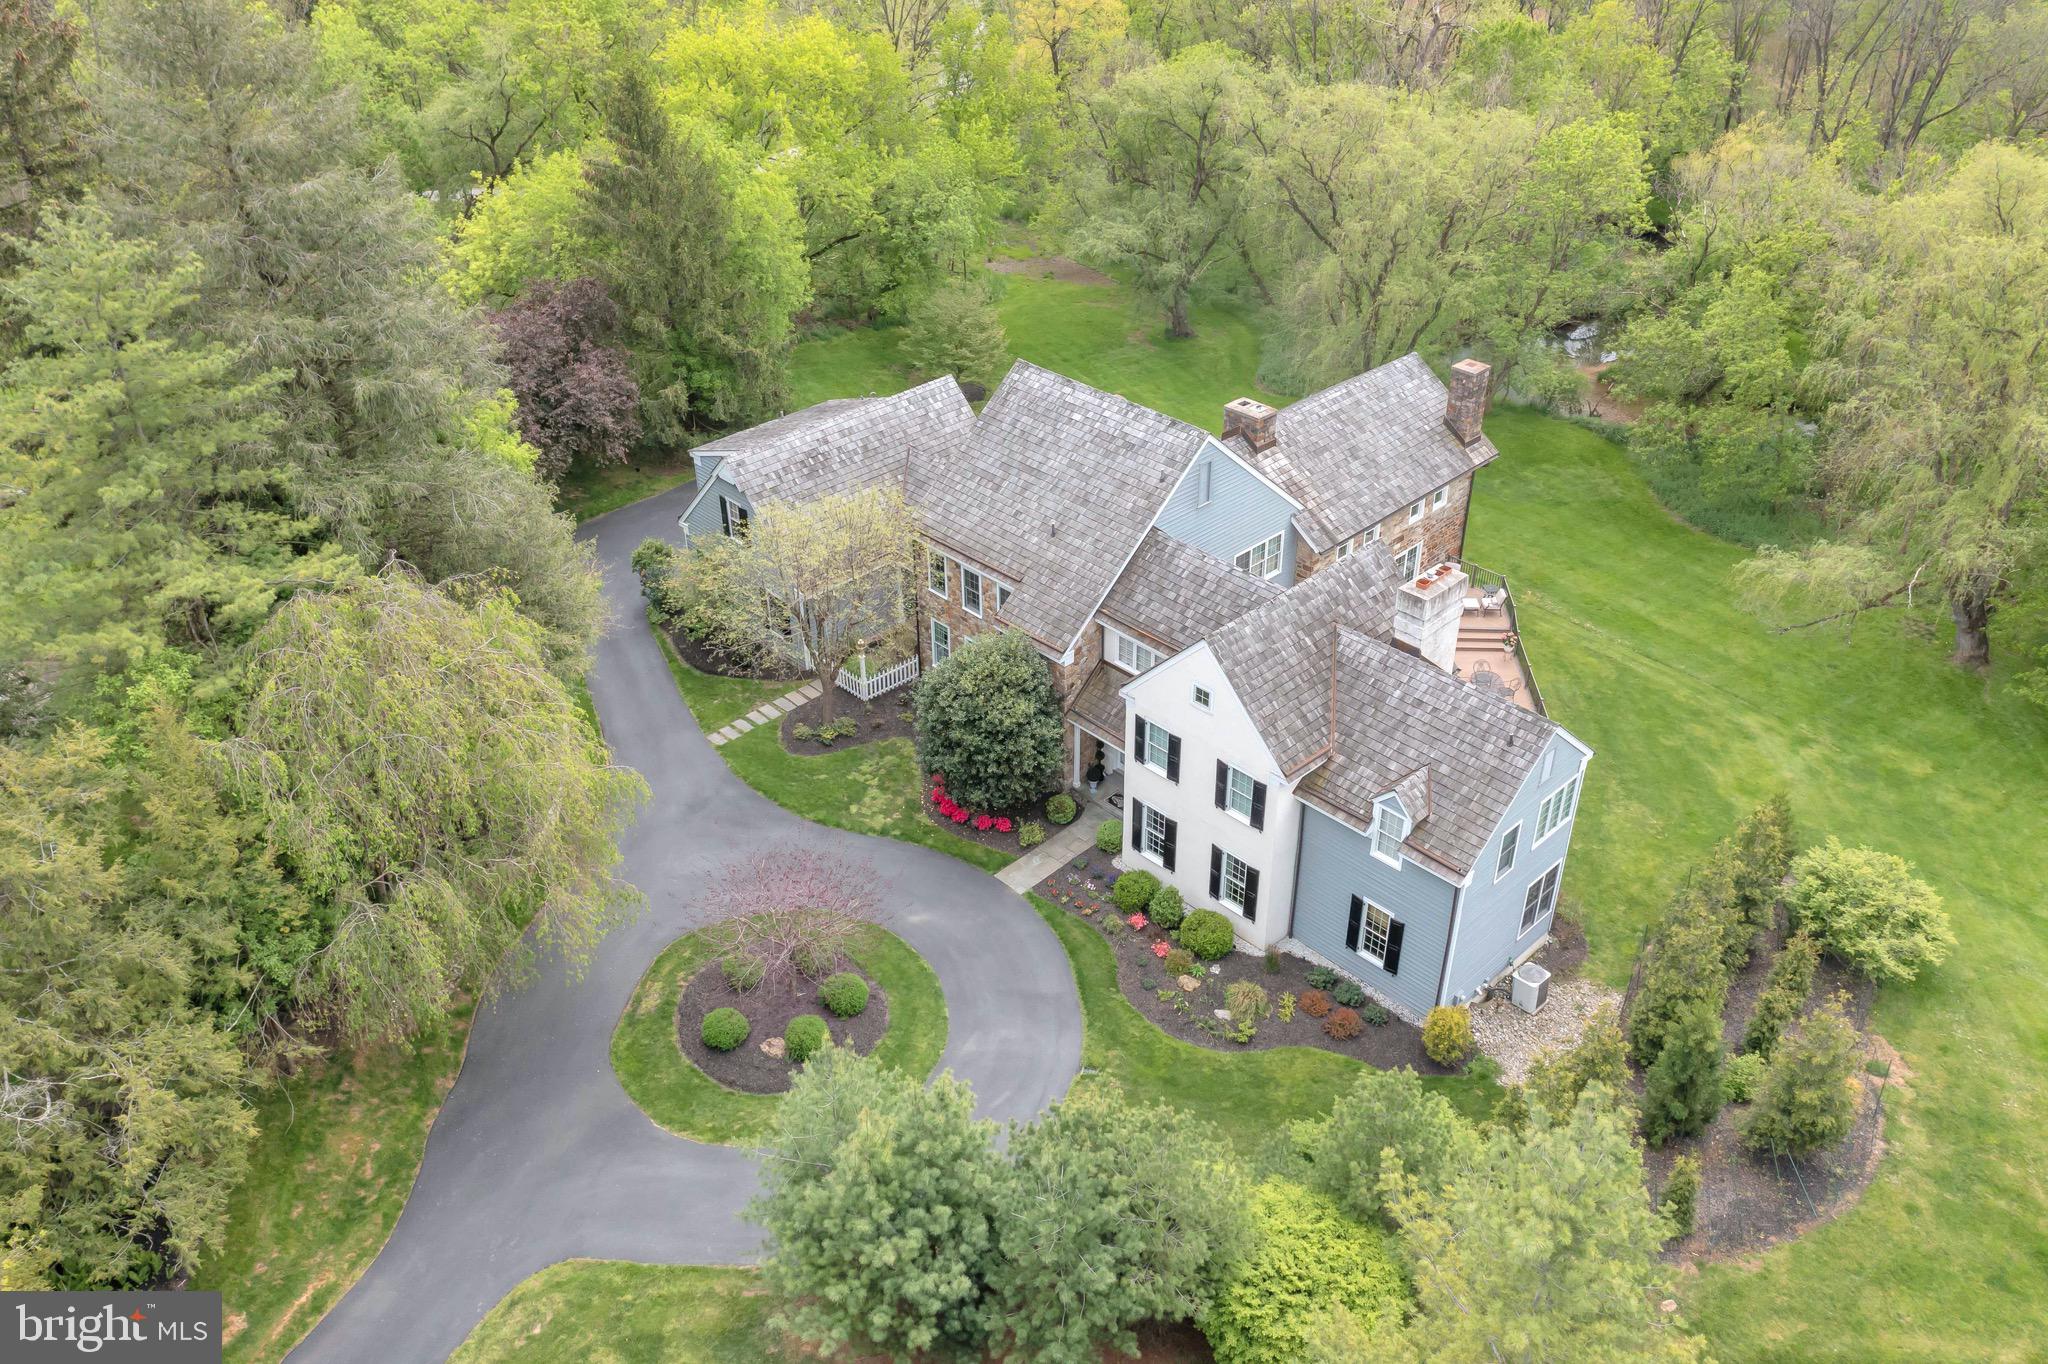 an aerial view of a house with a garden and trees